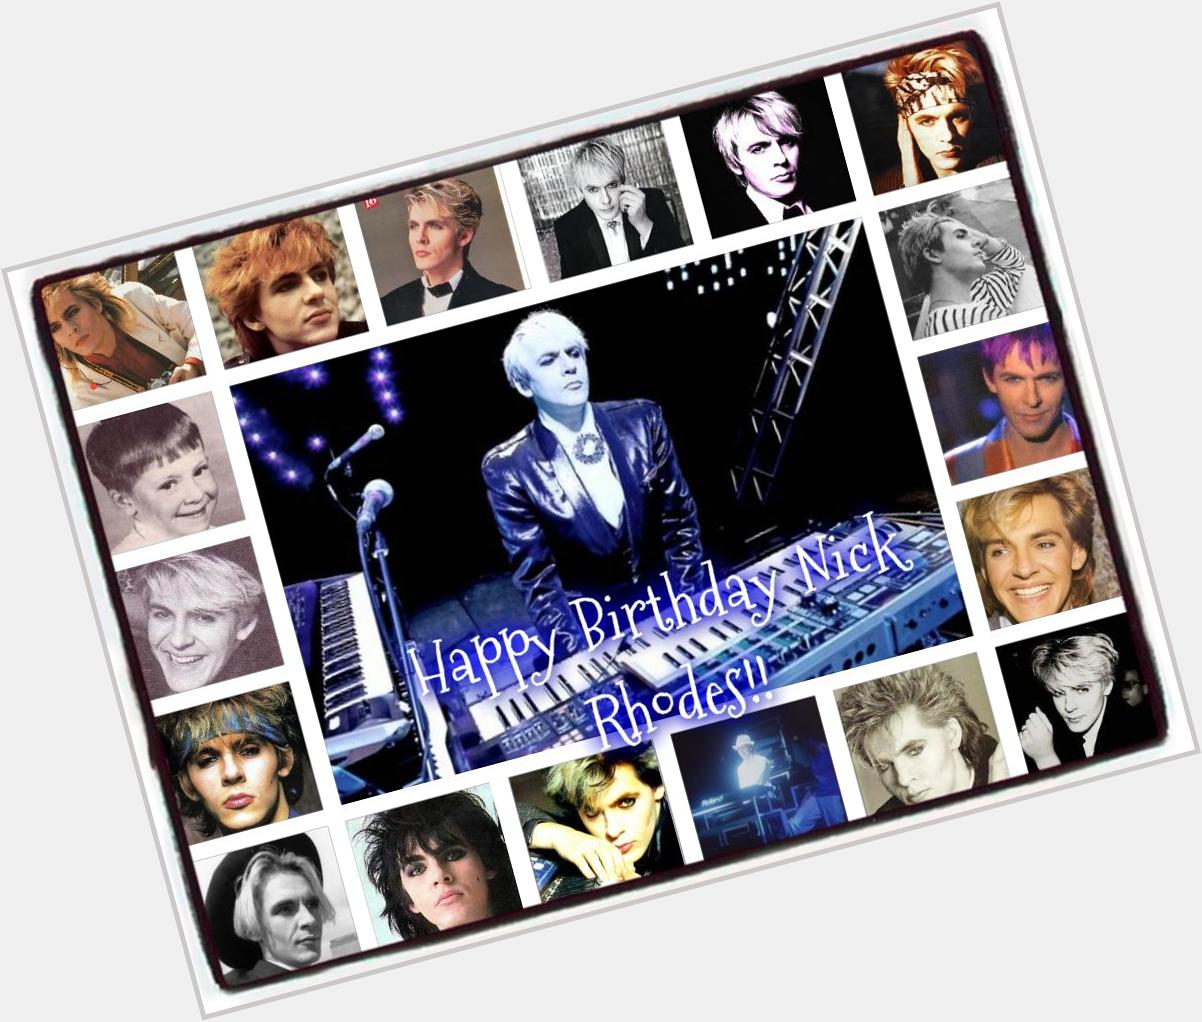 Happy Birthday dear master of the synthesizer Nick Rhodes!! We love you!! 